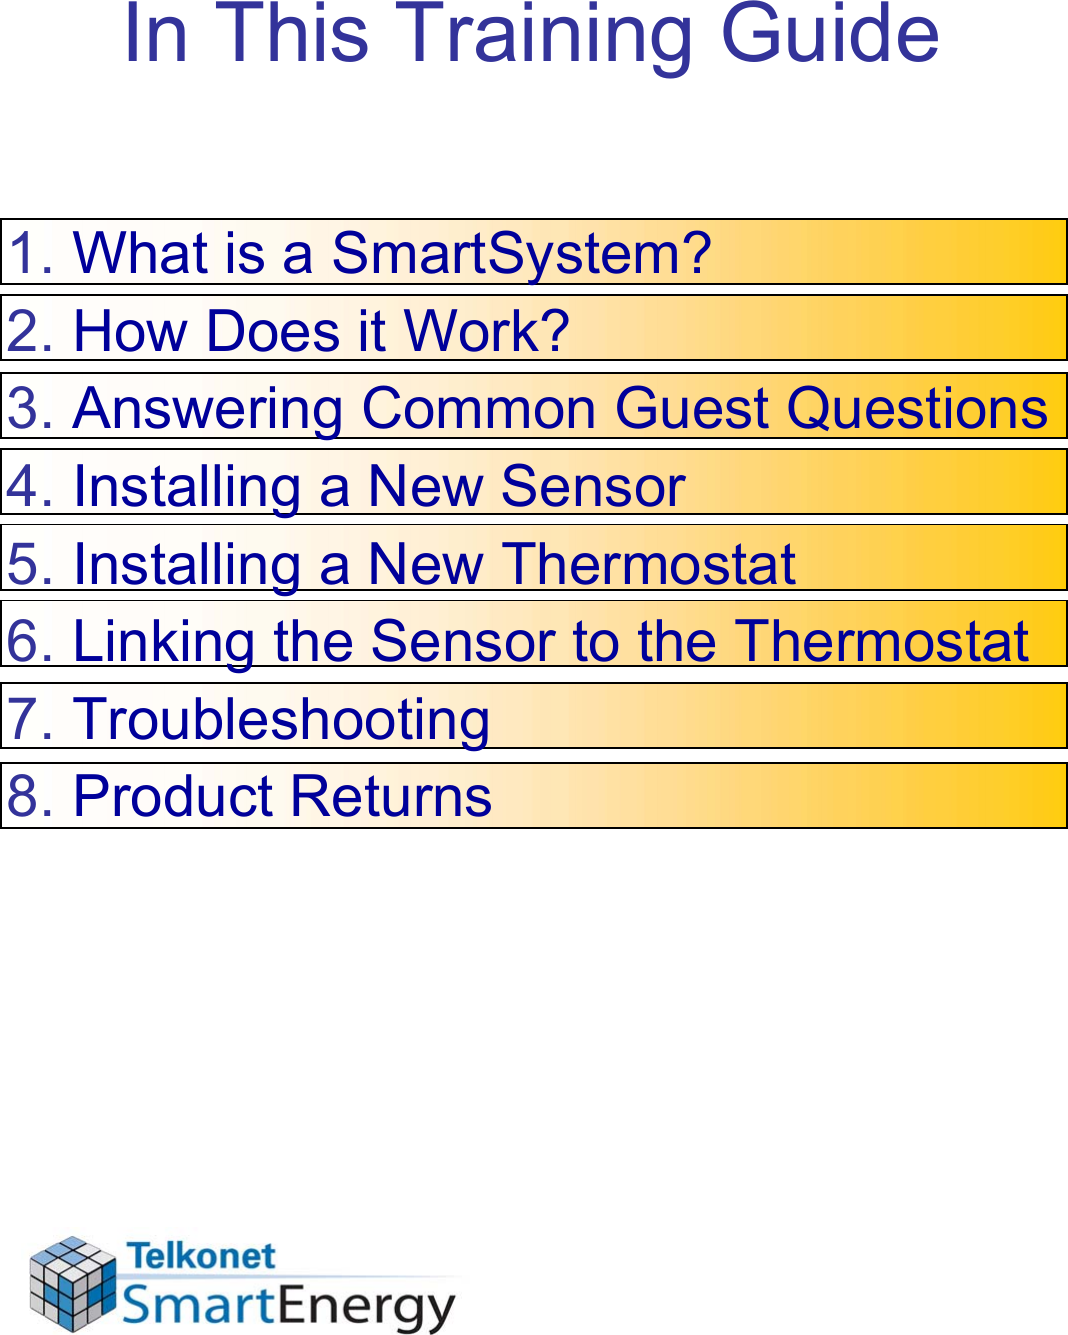 In This Training Guide1. What is a SmartSystem?2. How Does it Work?3. Answering Common Guest Questions4. Installing a New Sensor5. Installing a New Thermostat6. Linking the Sensor to the Thermostat7. Troubleshooting8. Product Returns